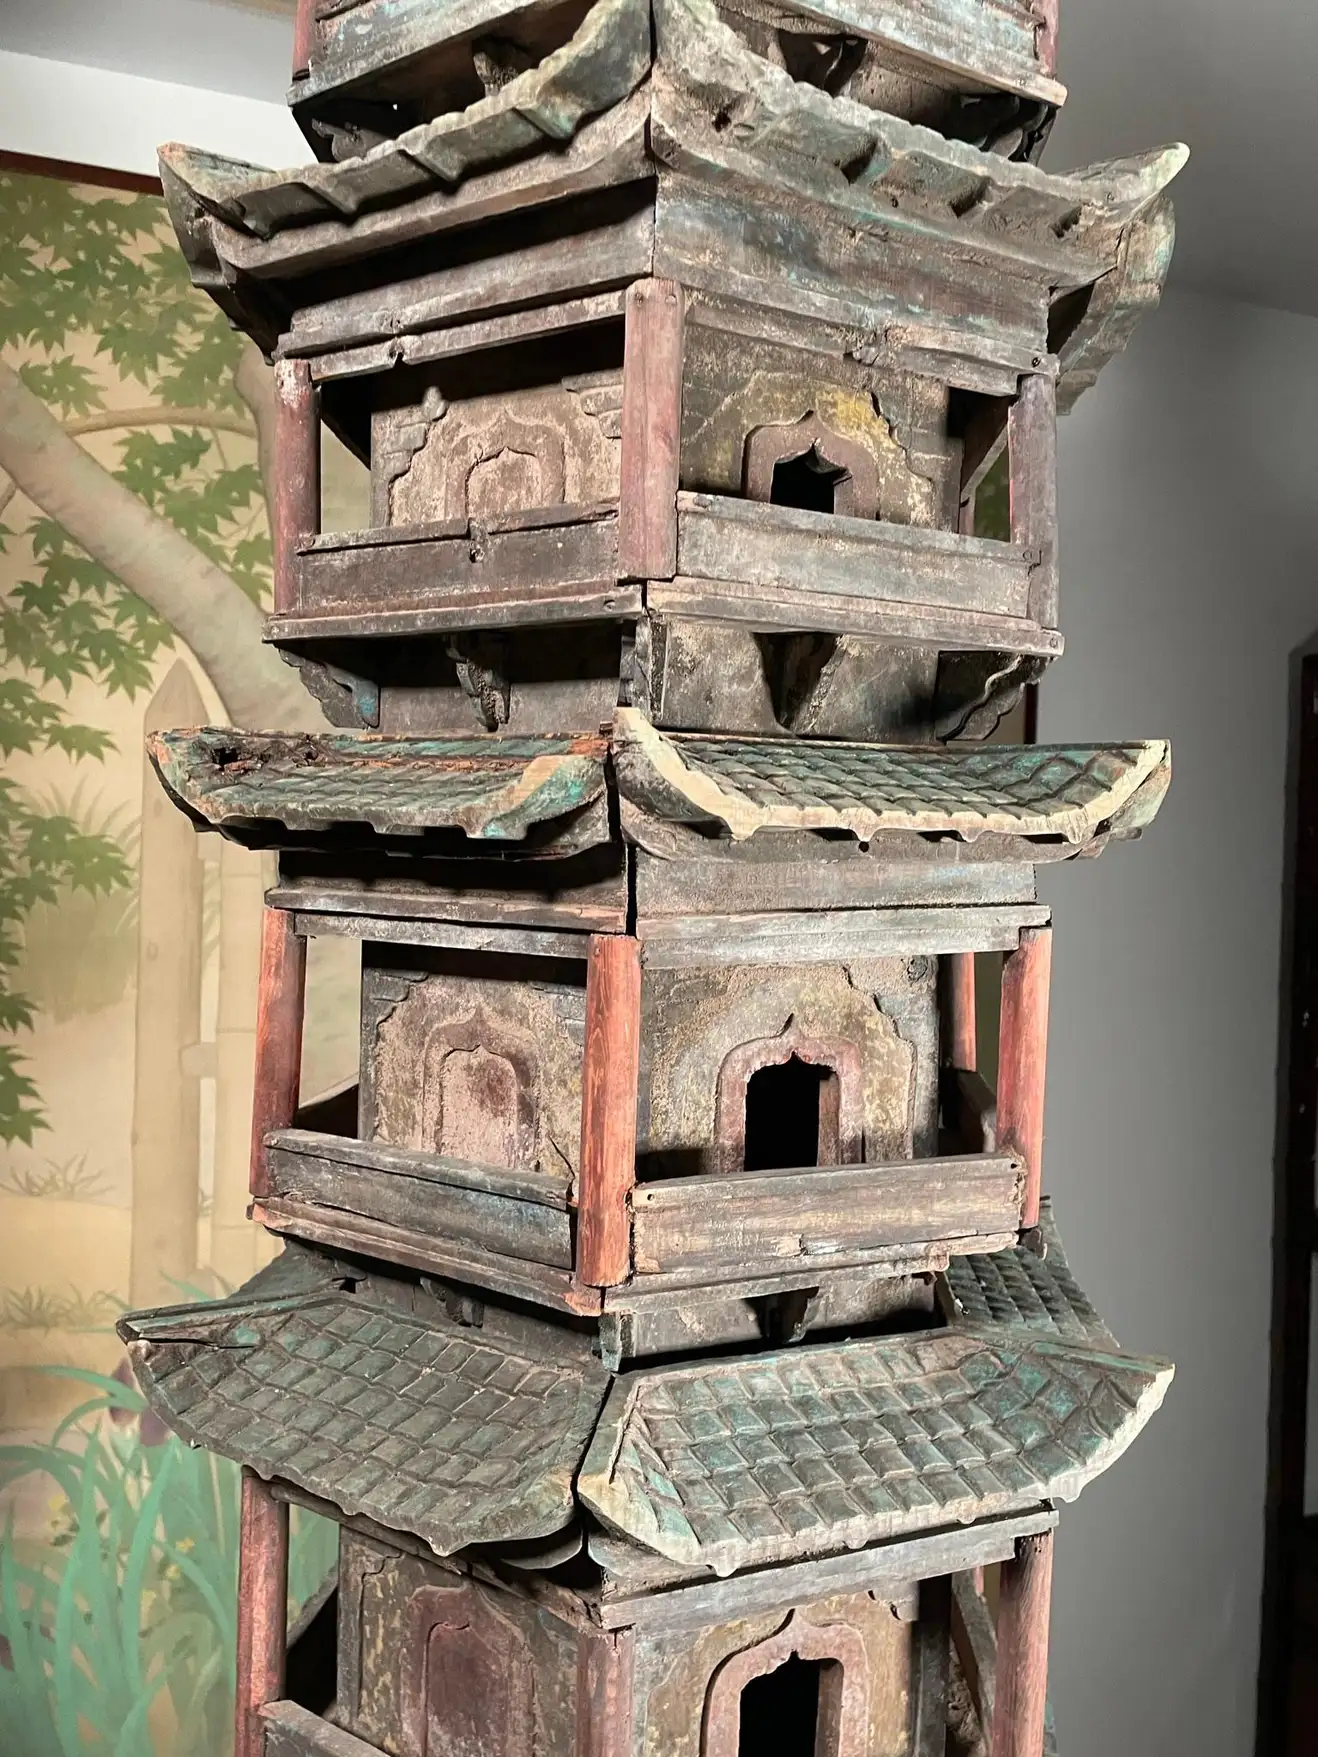 Chinese Antique Monumental Buddhist Wooden Pagoda Tower